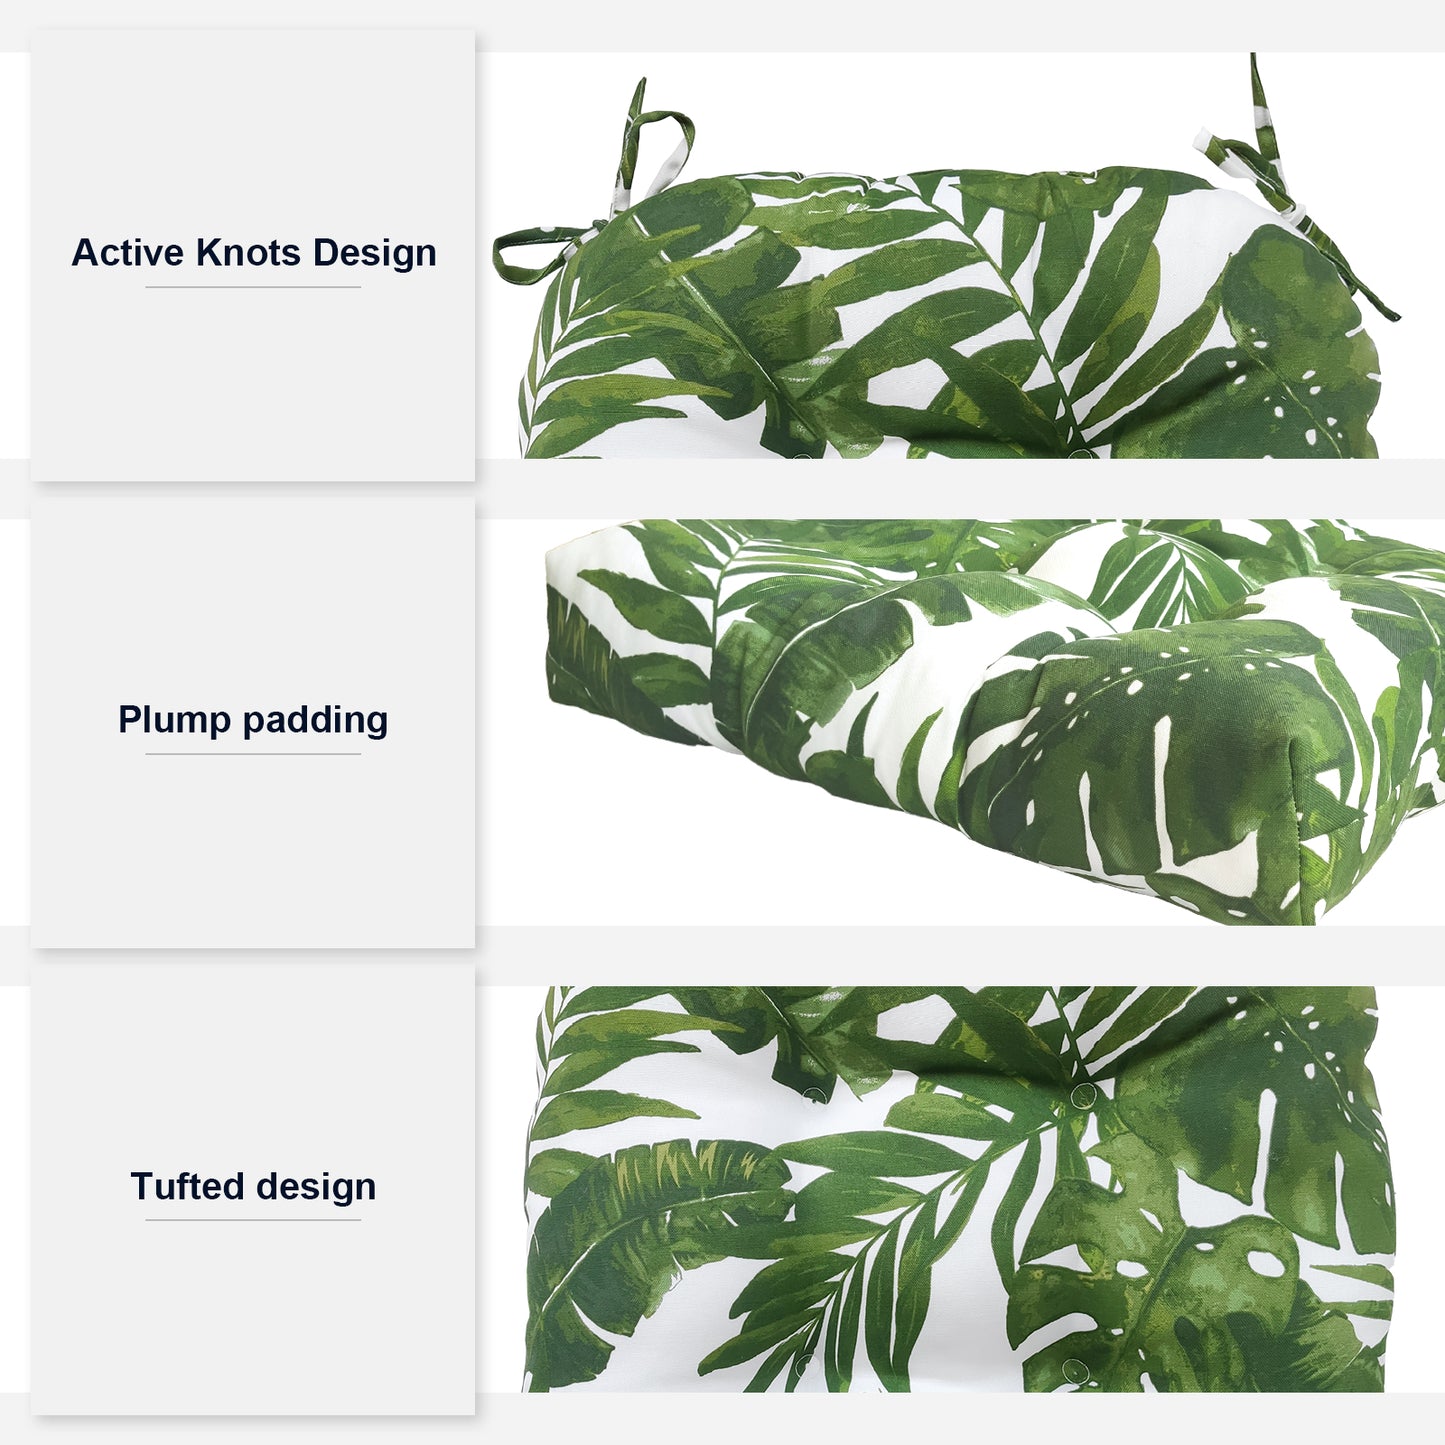 Melody Elephant Patio Wicker Chair Cushions, All Weather Outdoor Tufted Chair Pads Pack of 2, 19 x 19 x 5 Inch U-Shaped Seat Cushions of Garden Furniture Decoration, Palm Green